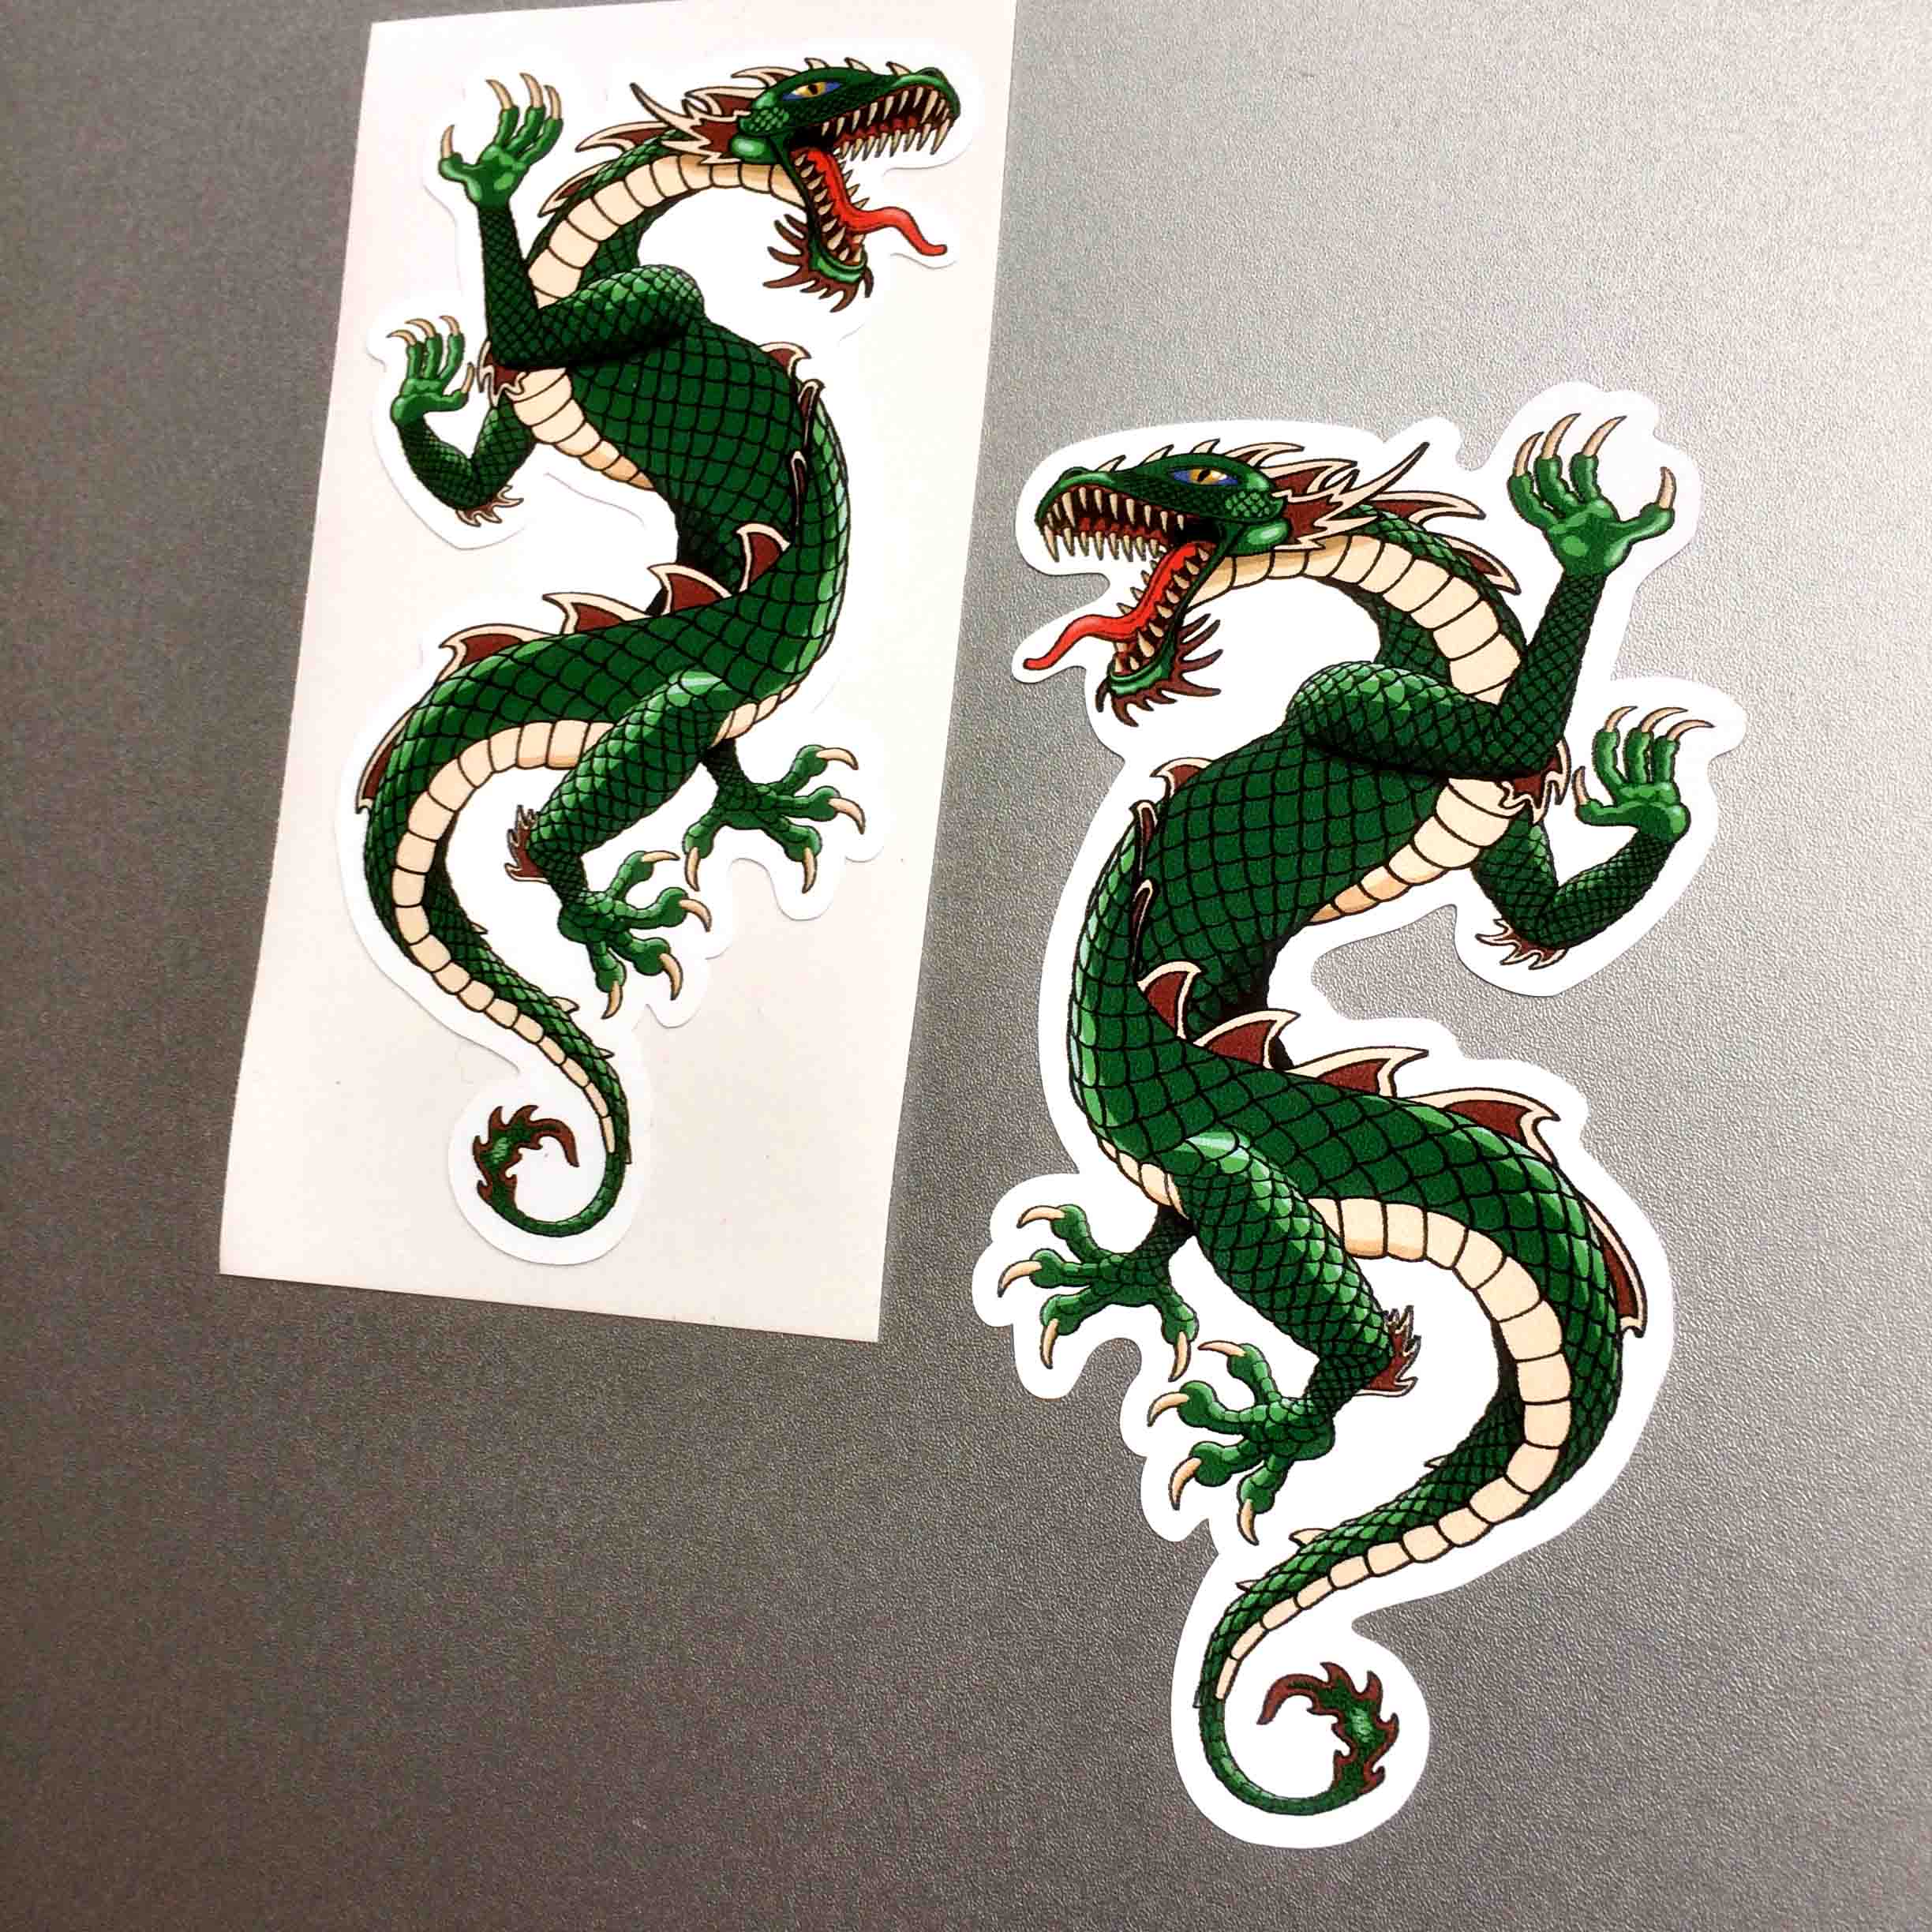 A four legged green dragon with scaly skin, a tail and jaws wide open displaying a red tongue and sharp teeth.